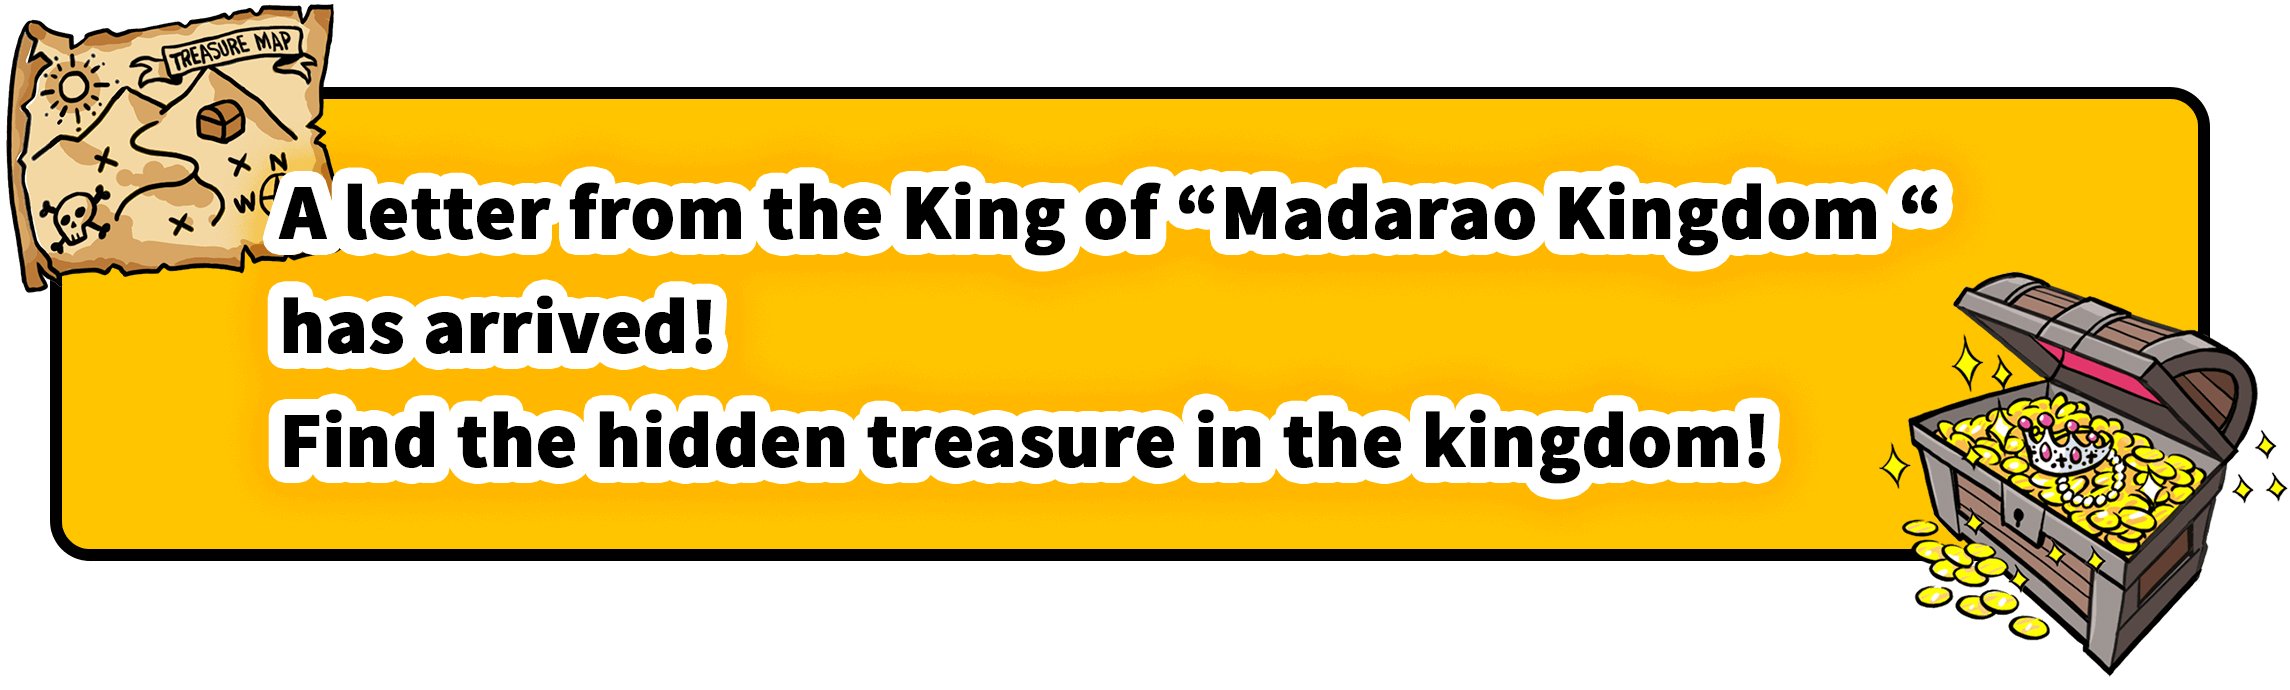 A letter of request from the King of the Snow Kingdom Motted Kingdom has arrived! Find the hidden treasure in the kingdom!